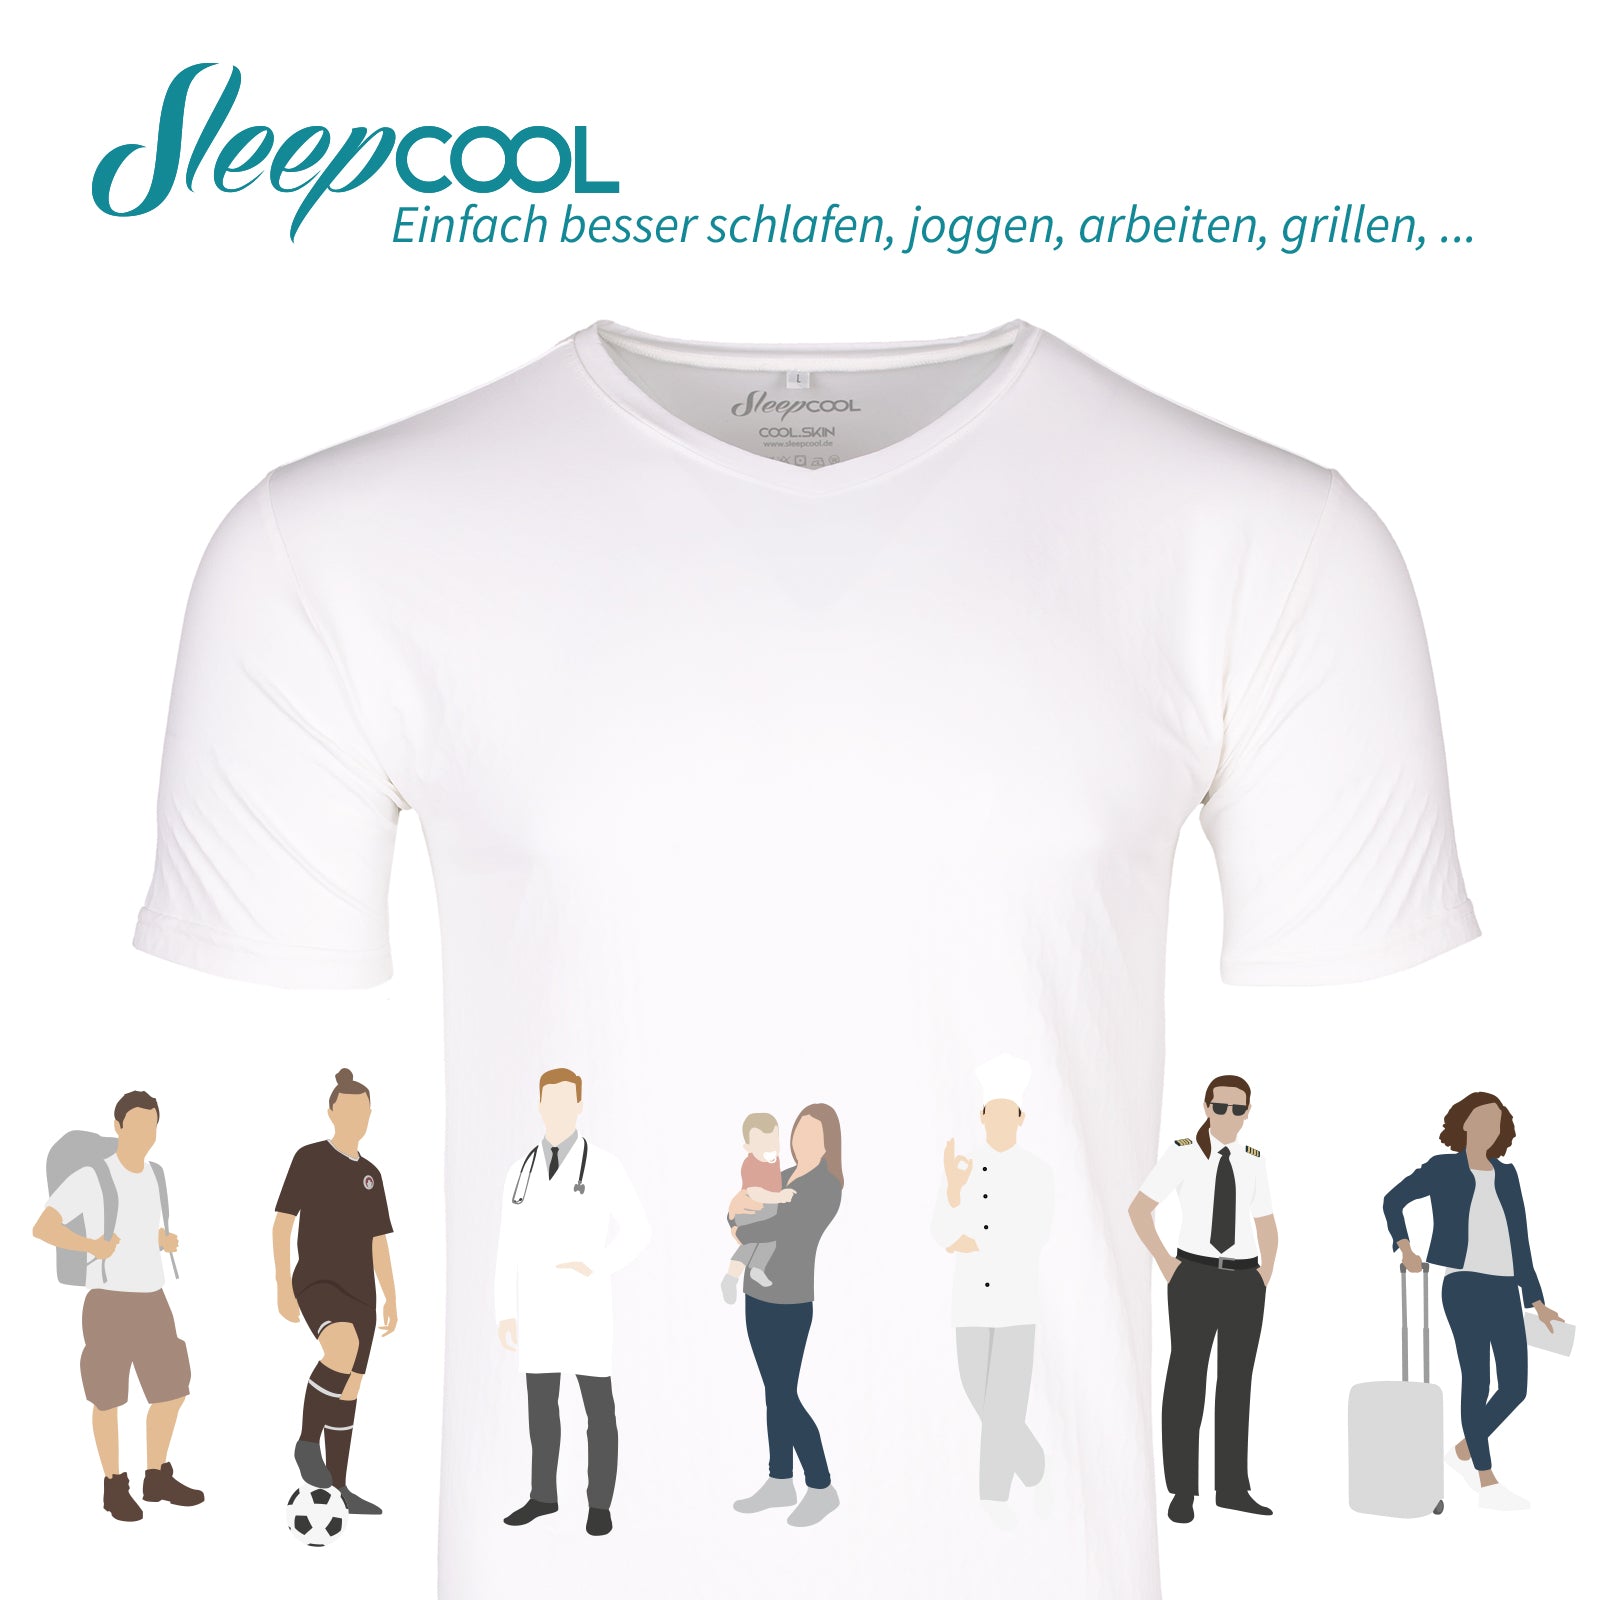 Men's shirt cool.skin - function shirt for men with cooling effect, the sleepcool feeling to take away